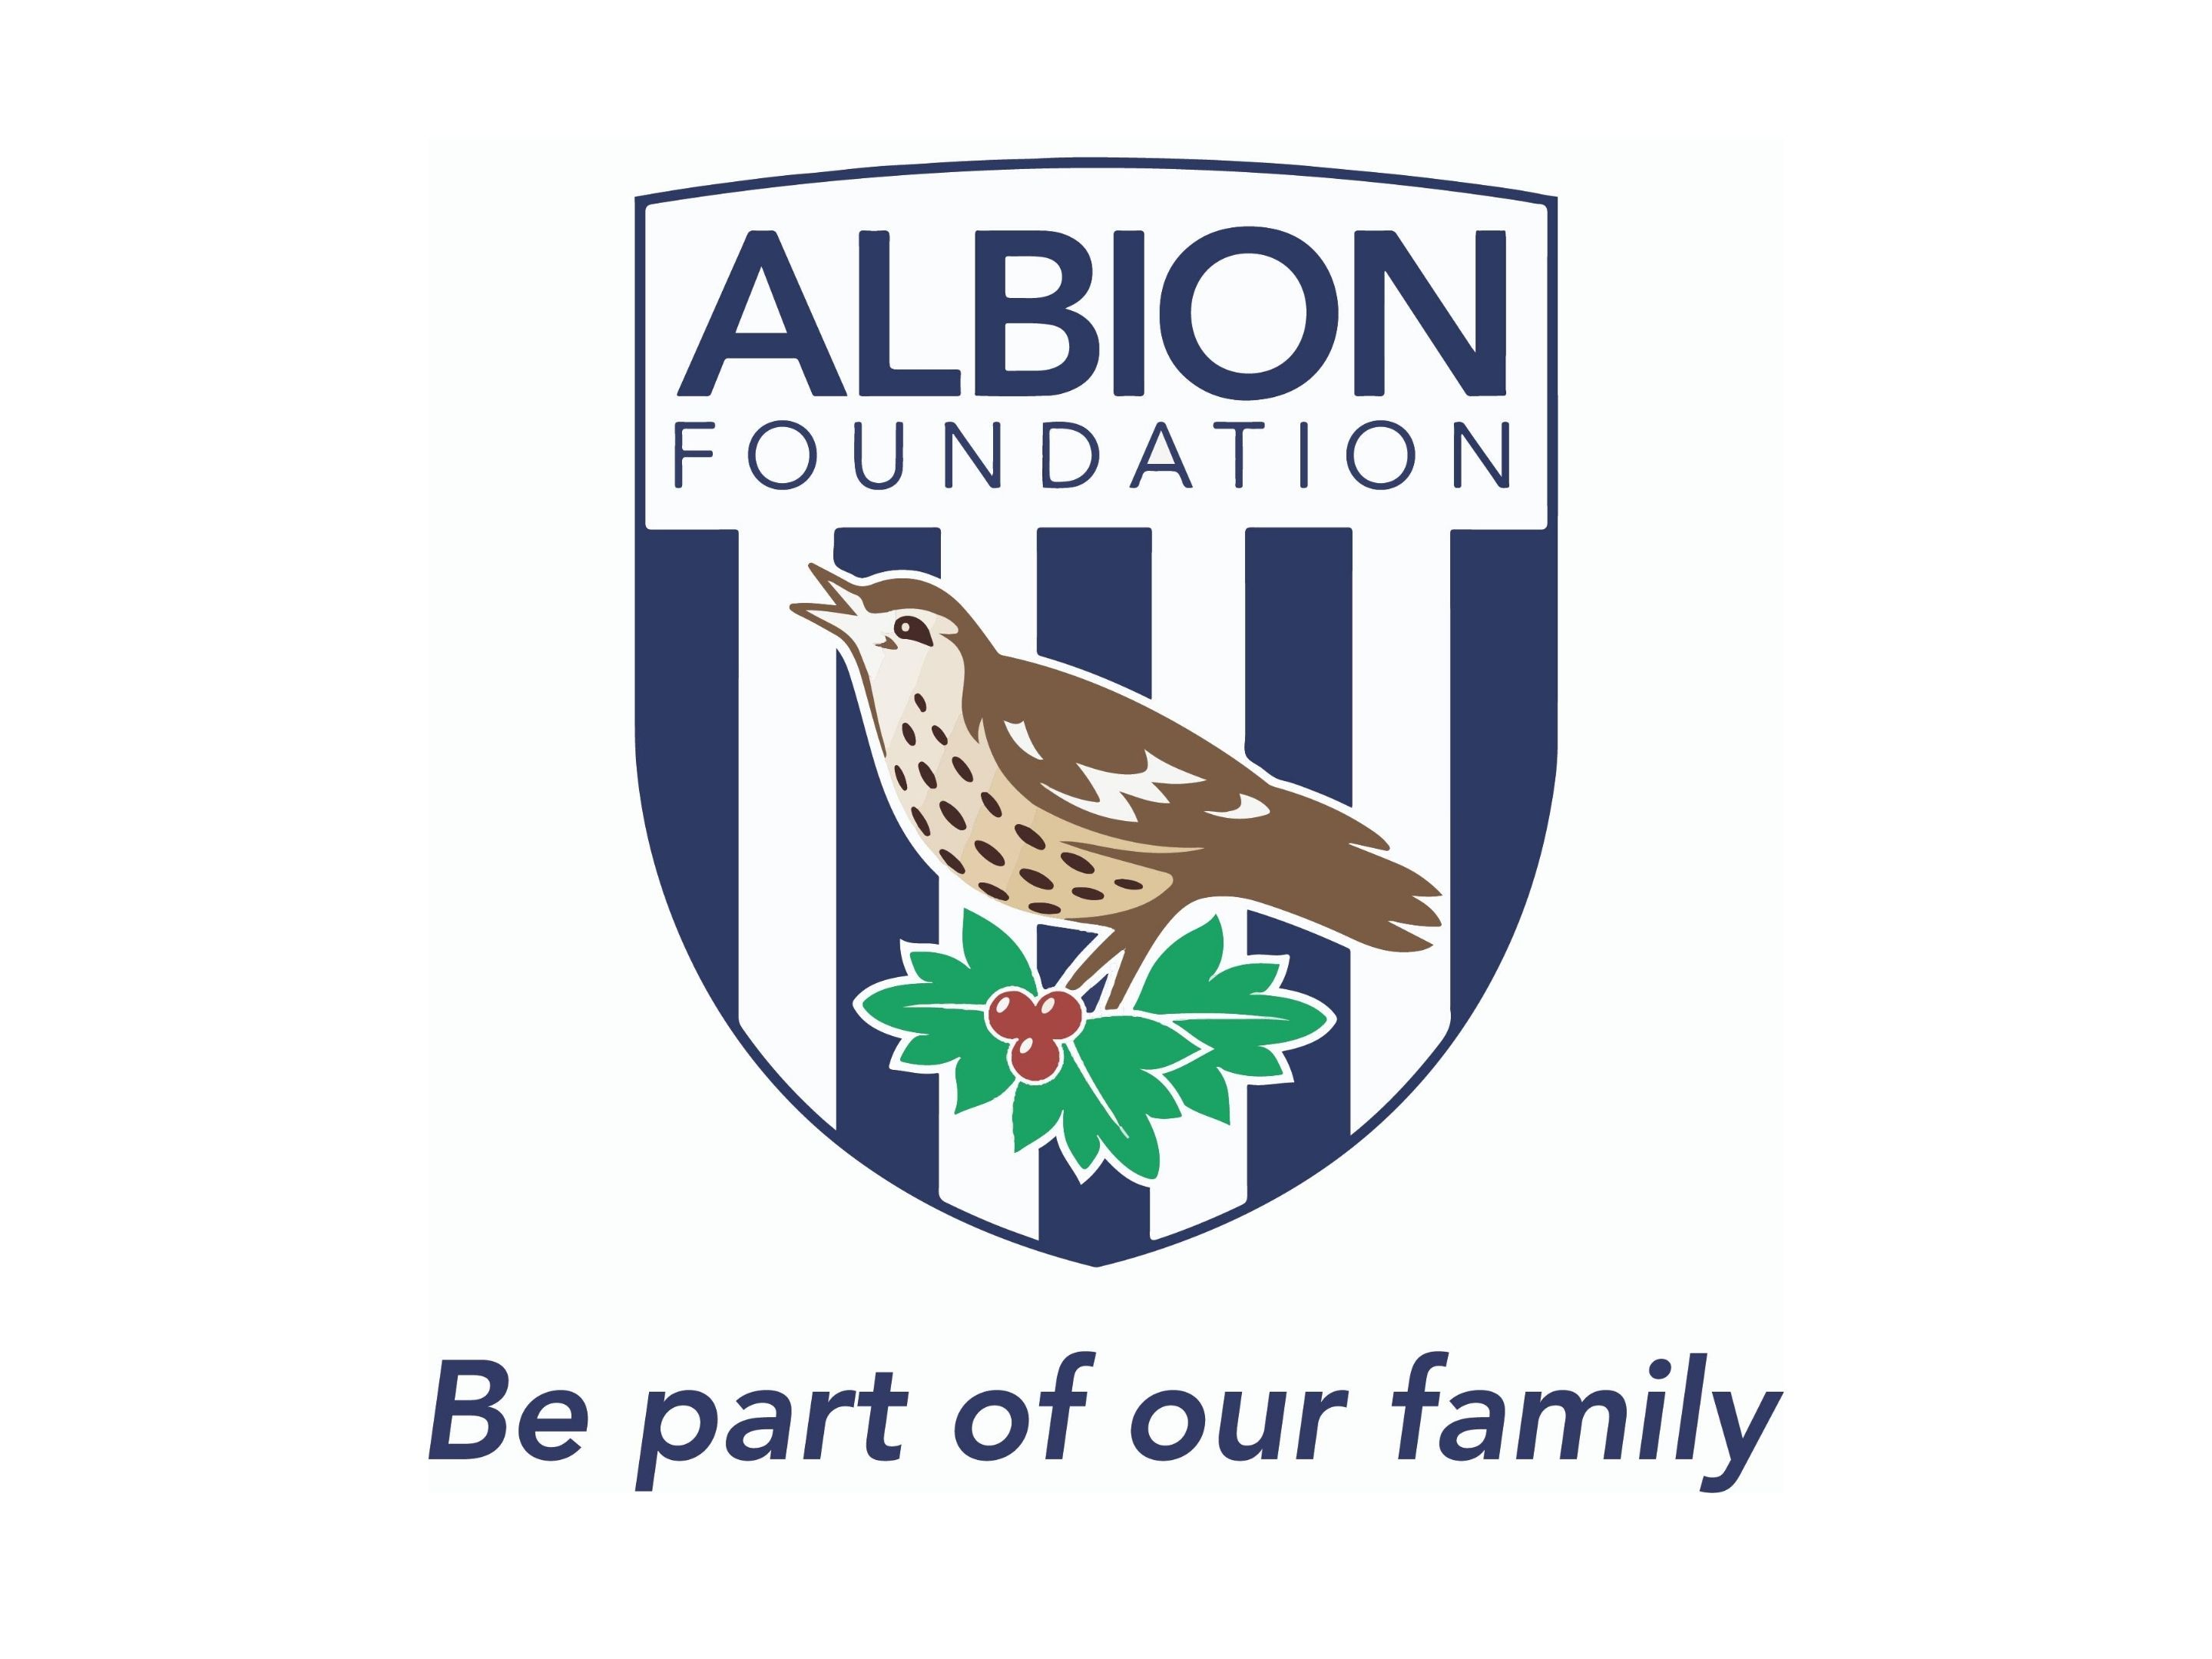 West Bromwich Albion Indoor Facility